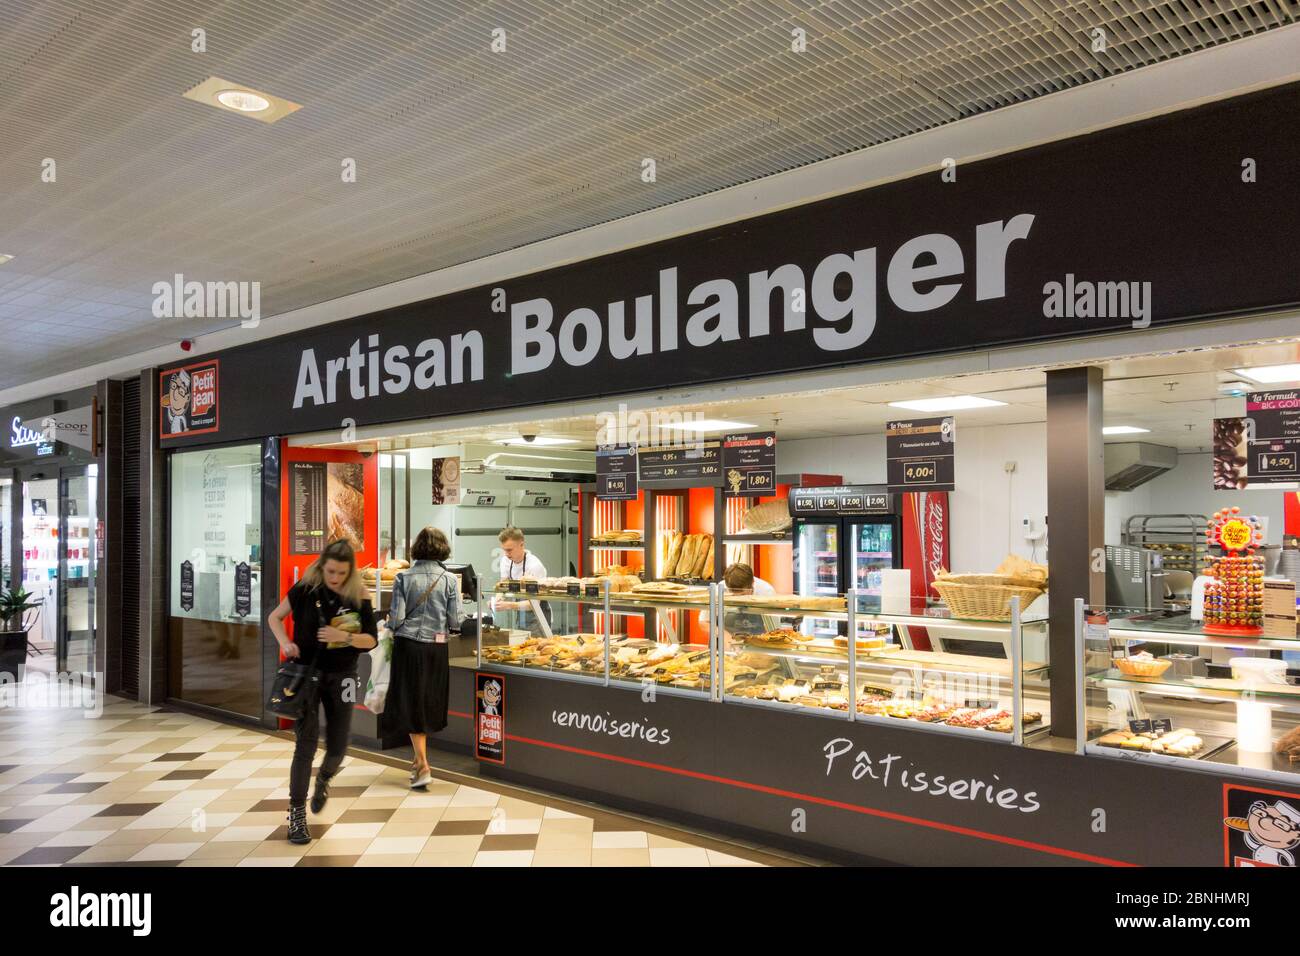 Artisan Boulanger in Les Eleis shopping mall, Cherbourg, Normandy, France Stock Photo